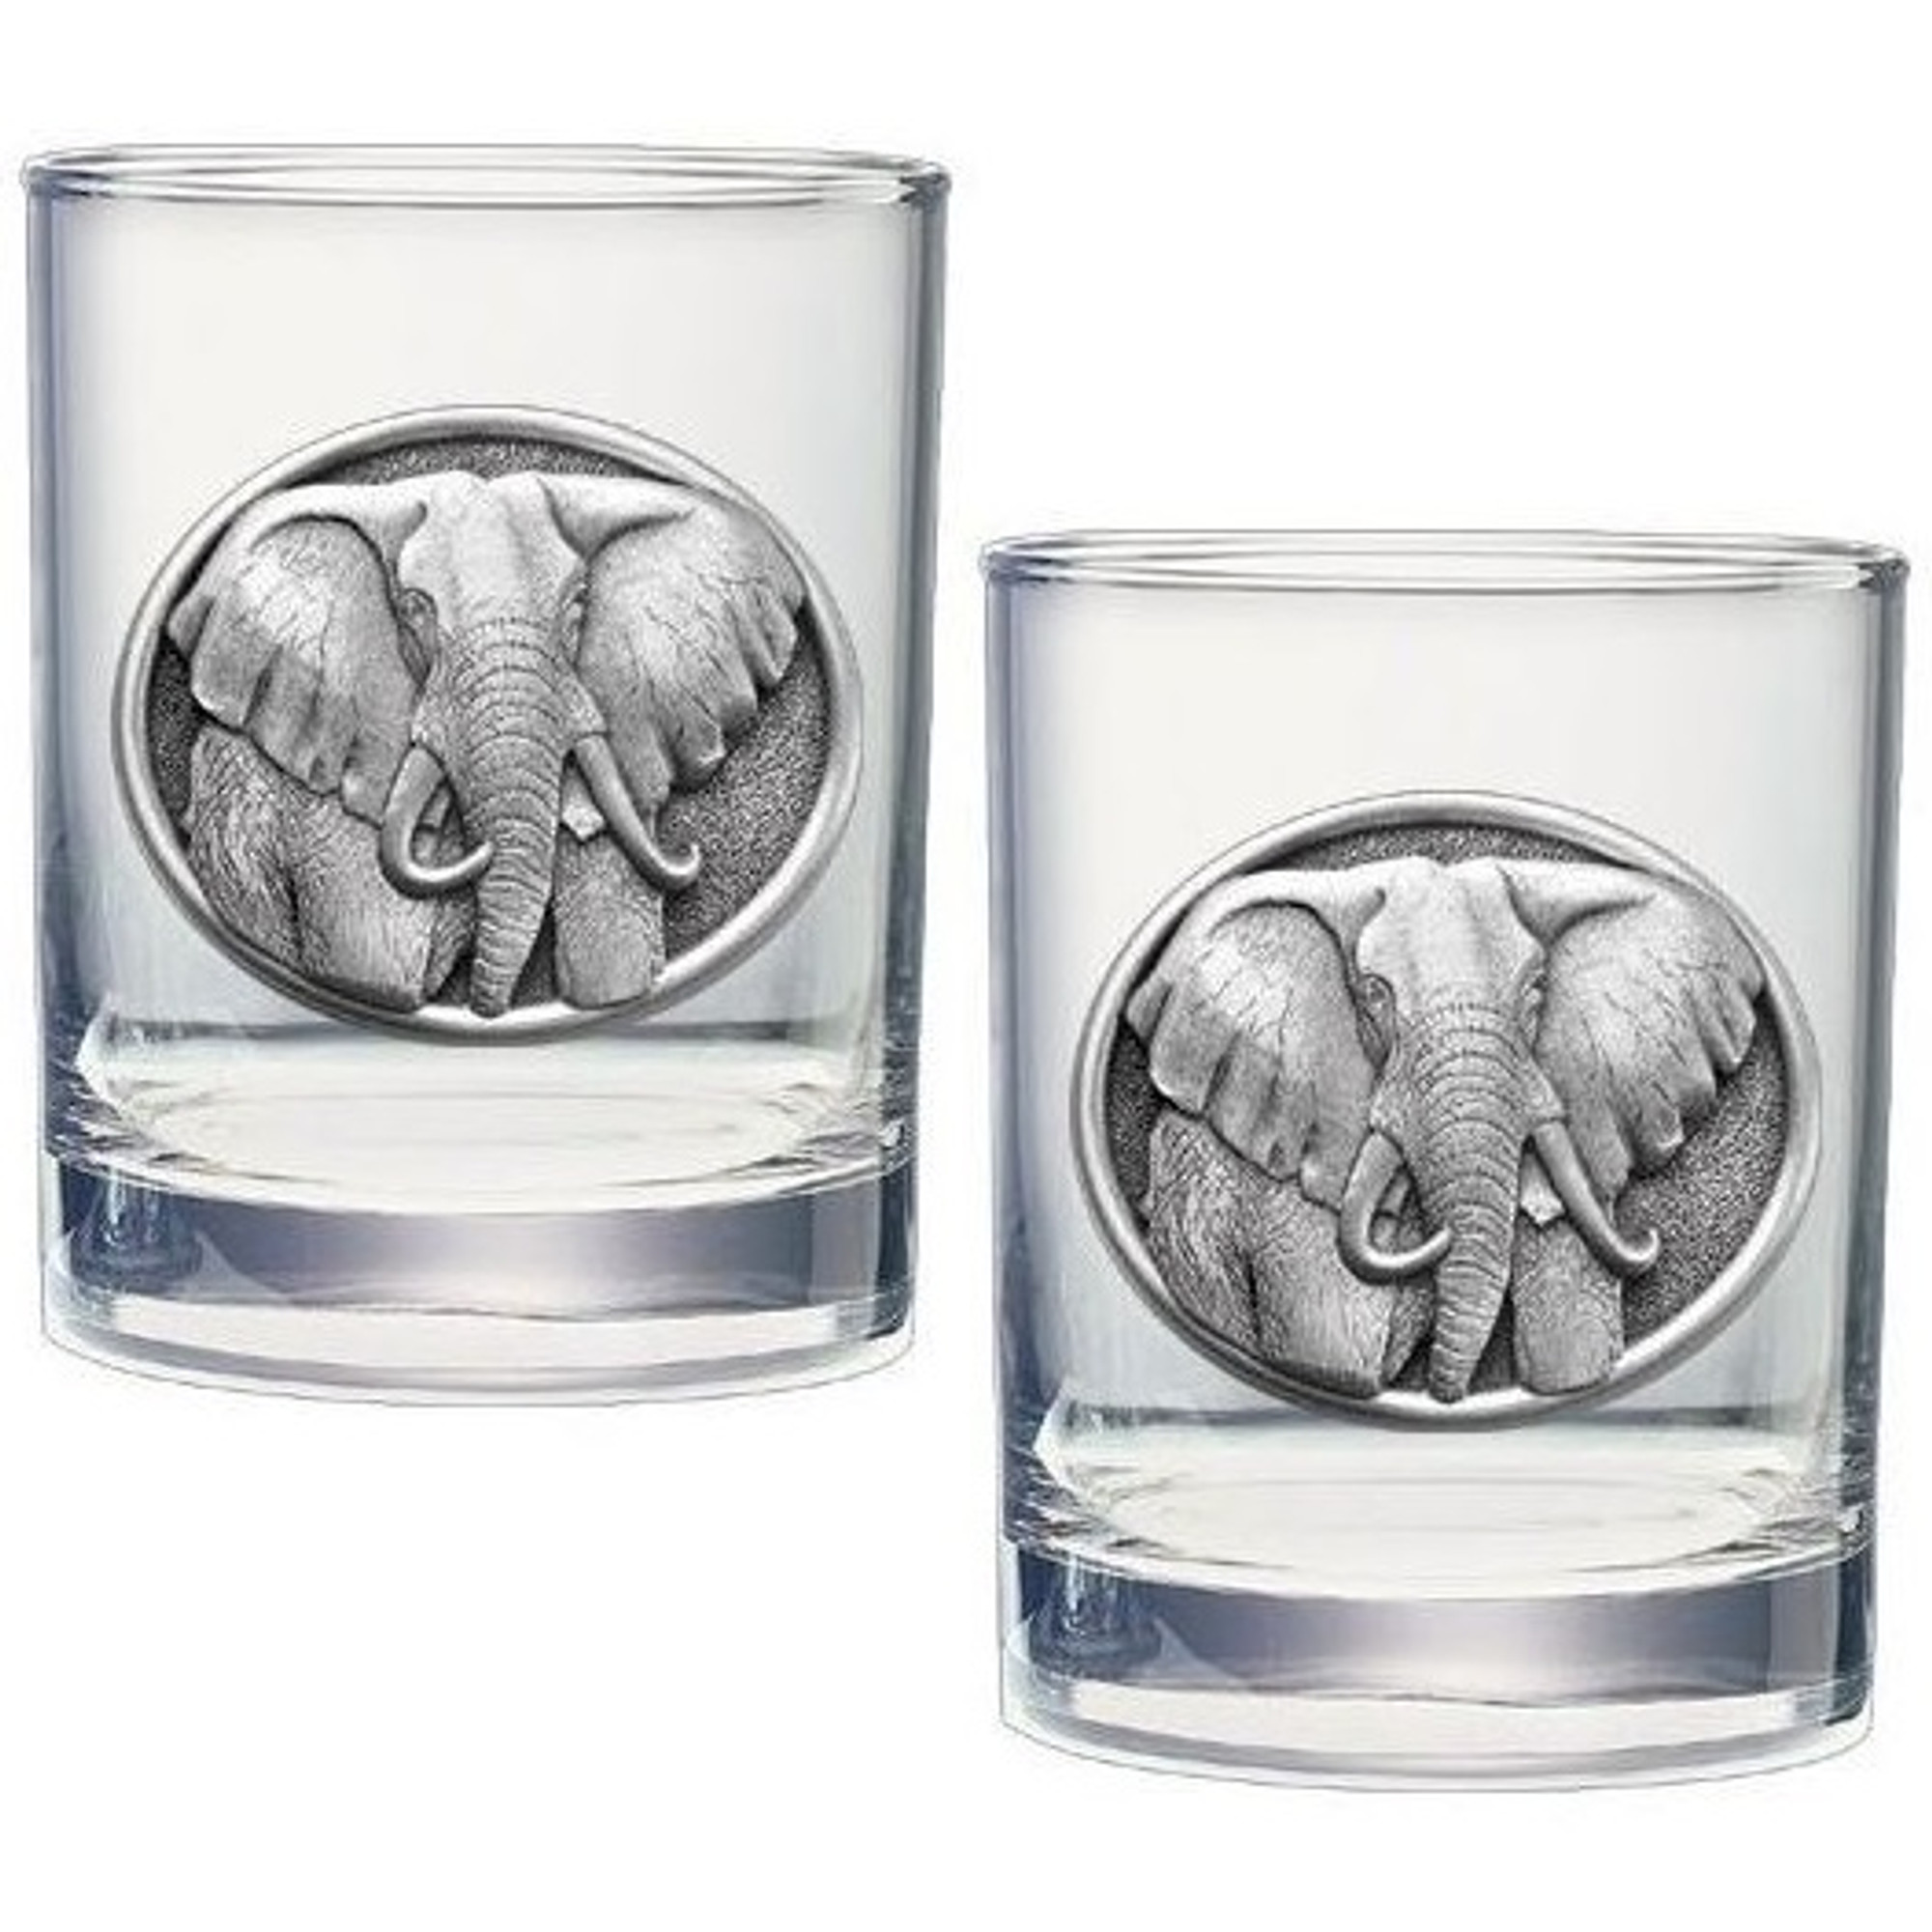 Heritage Pewter Army Stemless Glass Goblets – Set of